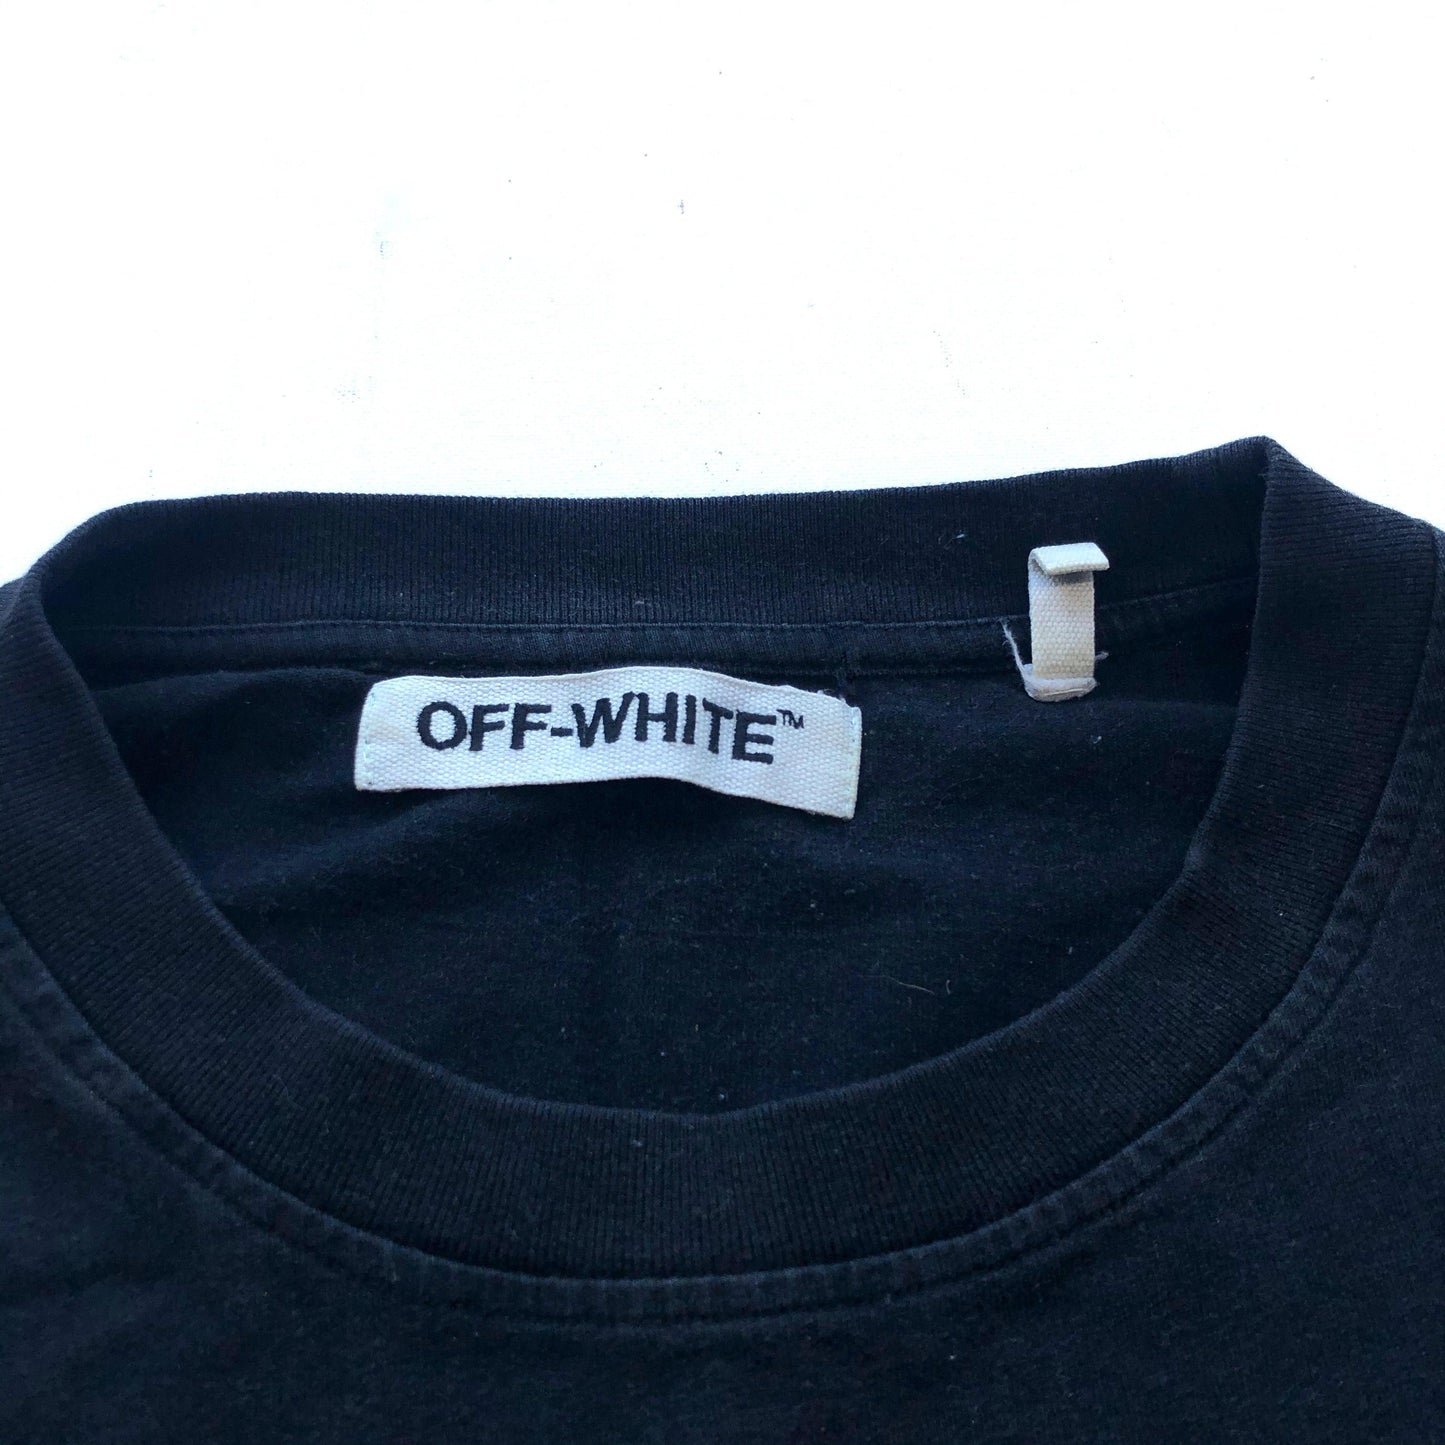 Off White Front Image Print Oversized Short Sleeved T Shirt with Iconic Arrows on the Back - Known Source